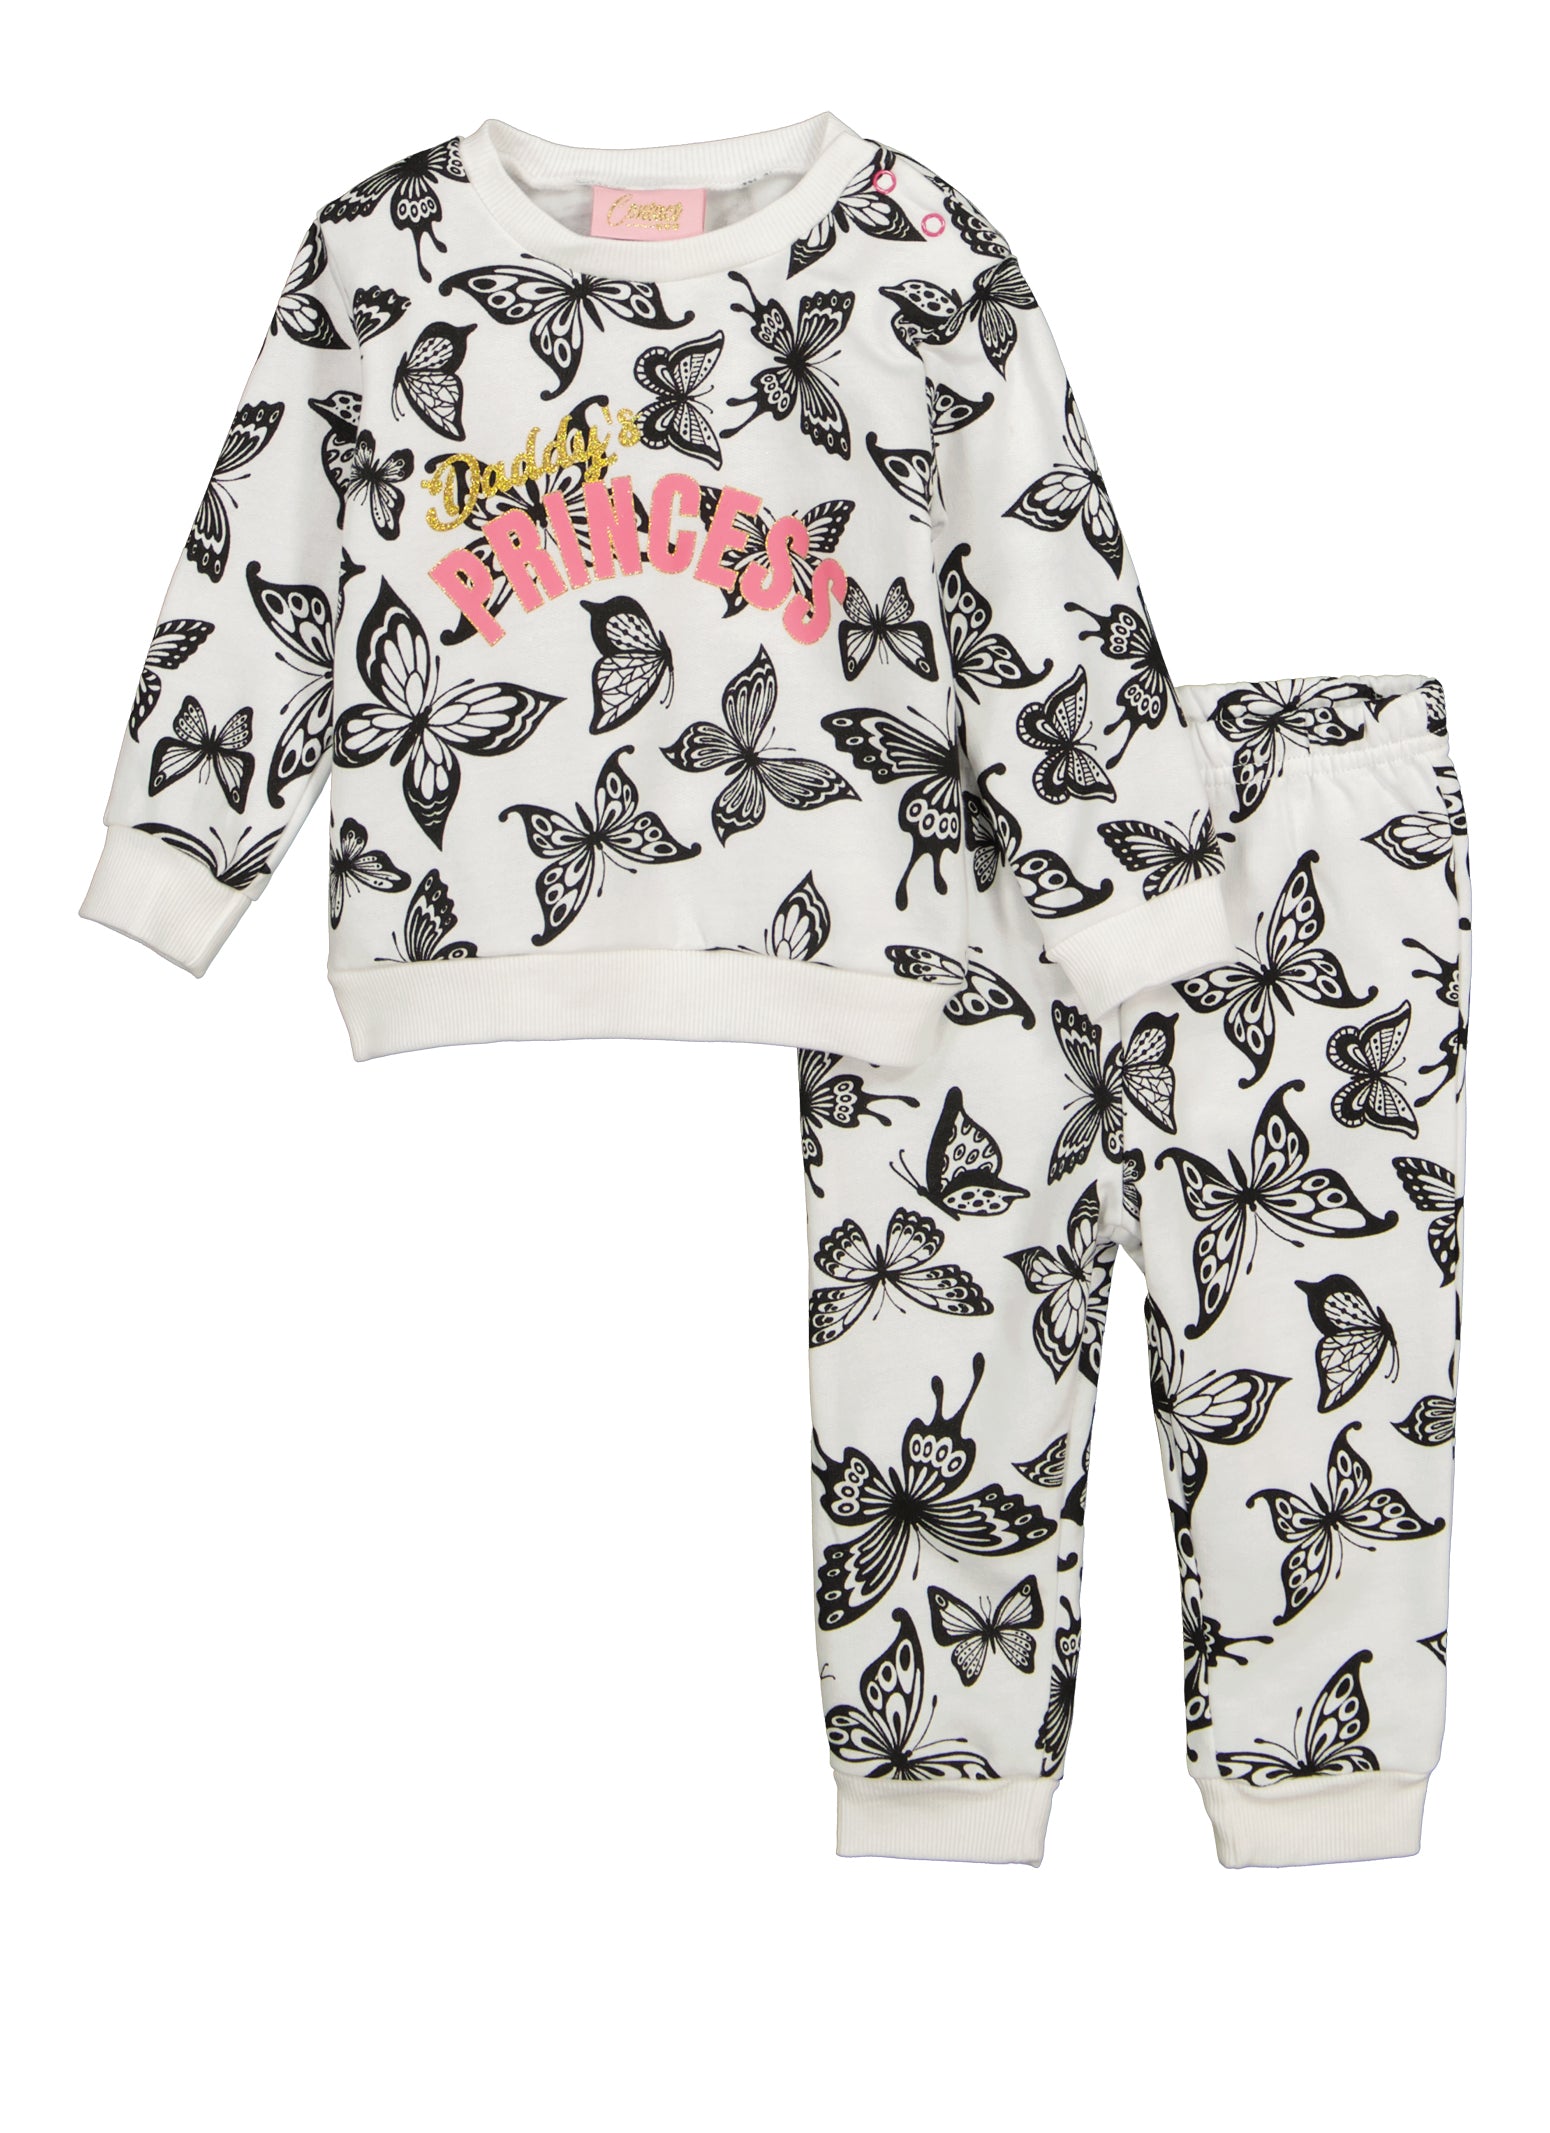 Baby Girls 12-24M Daddys Princess Butterfly Print Sweatshirt and Joggers, White, Size 24M